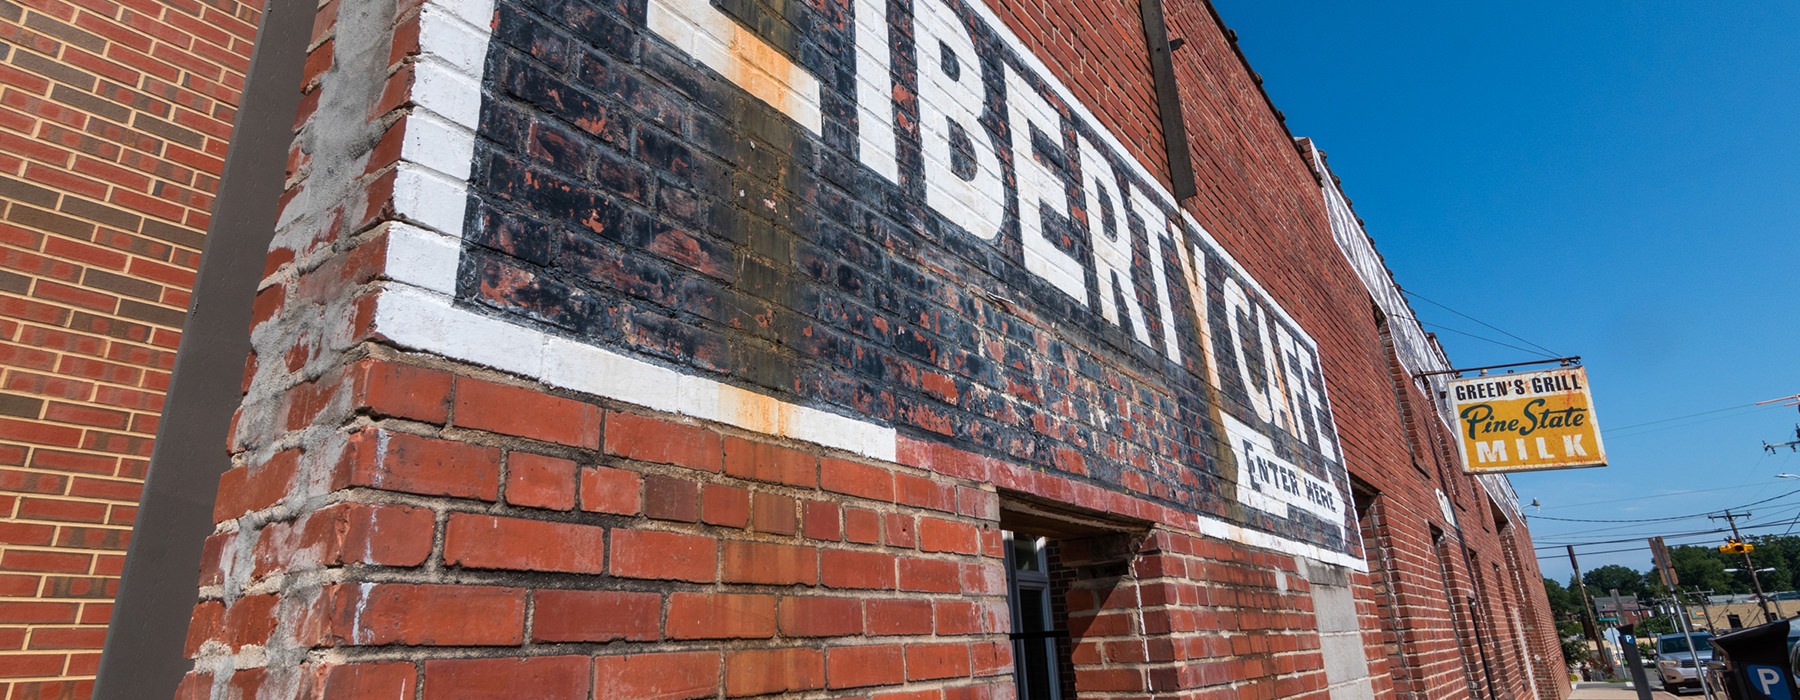 brick building with sign on side